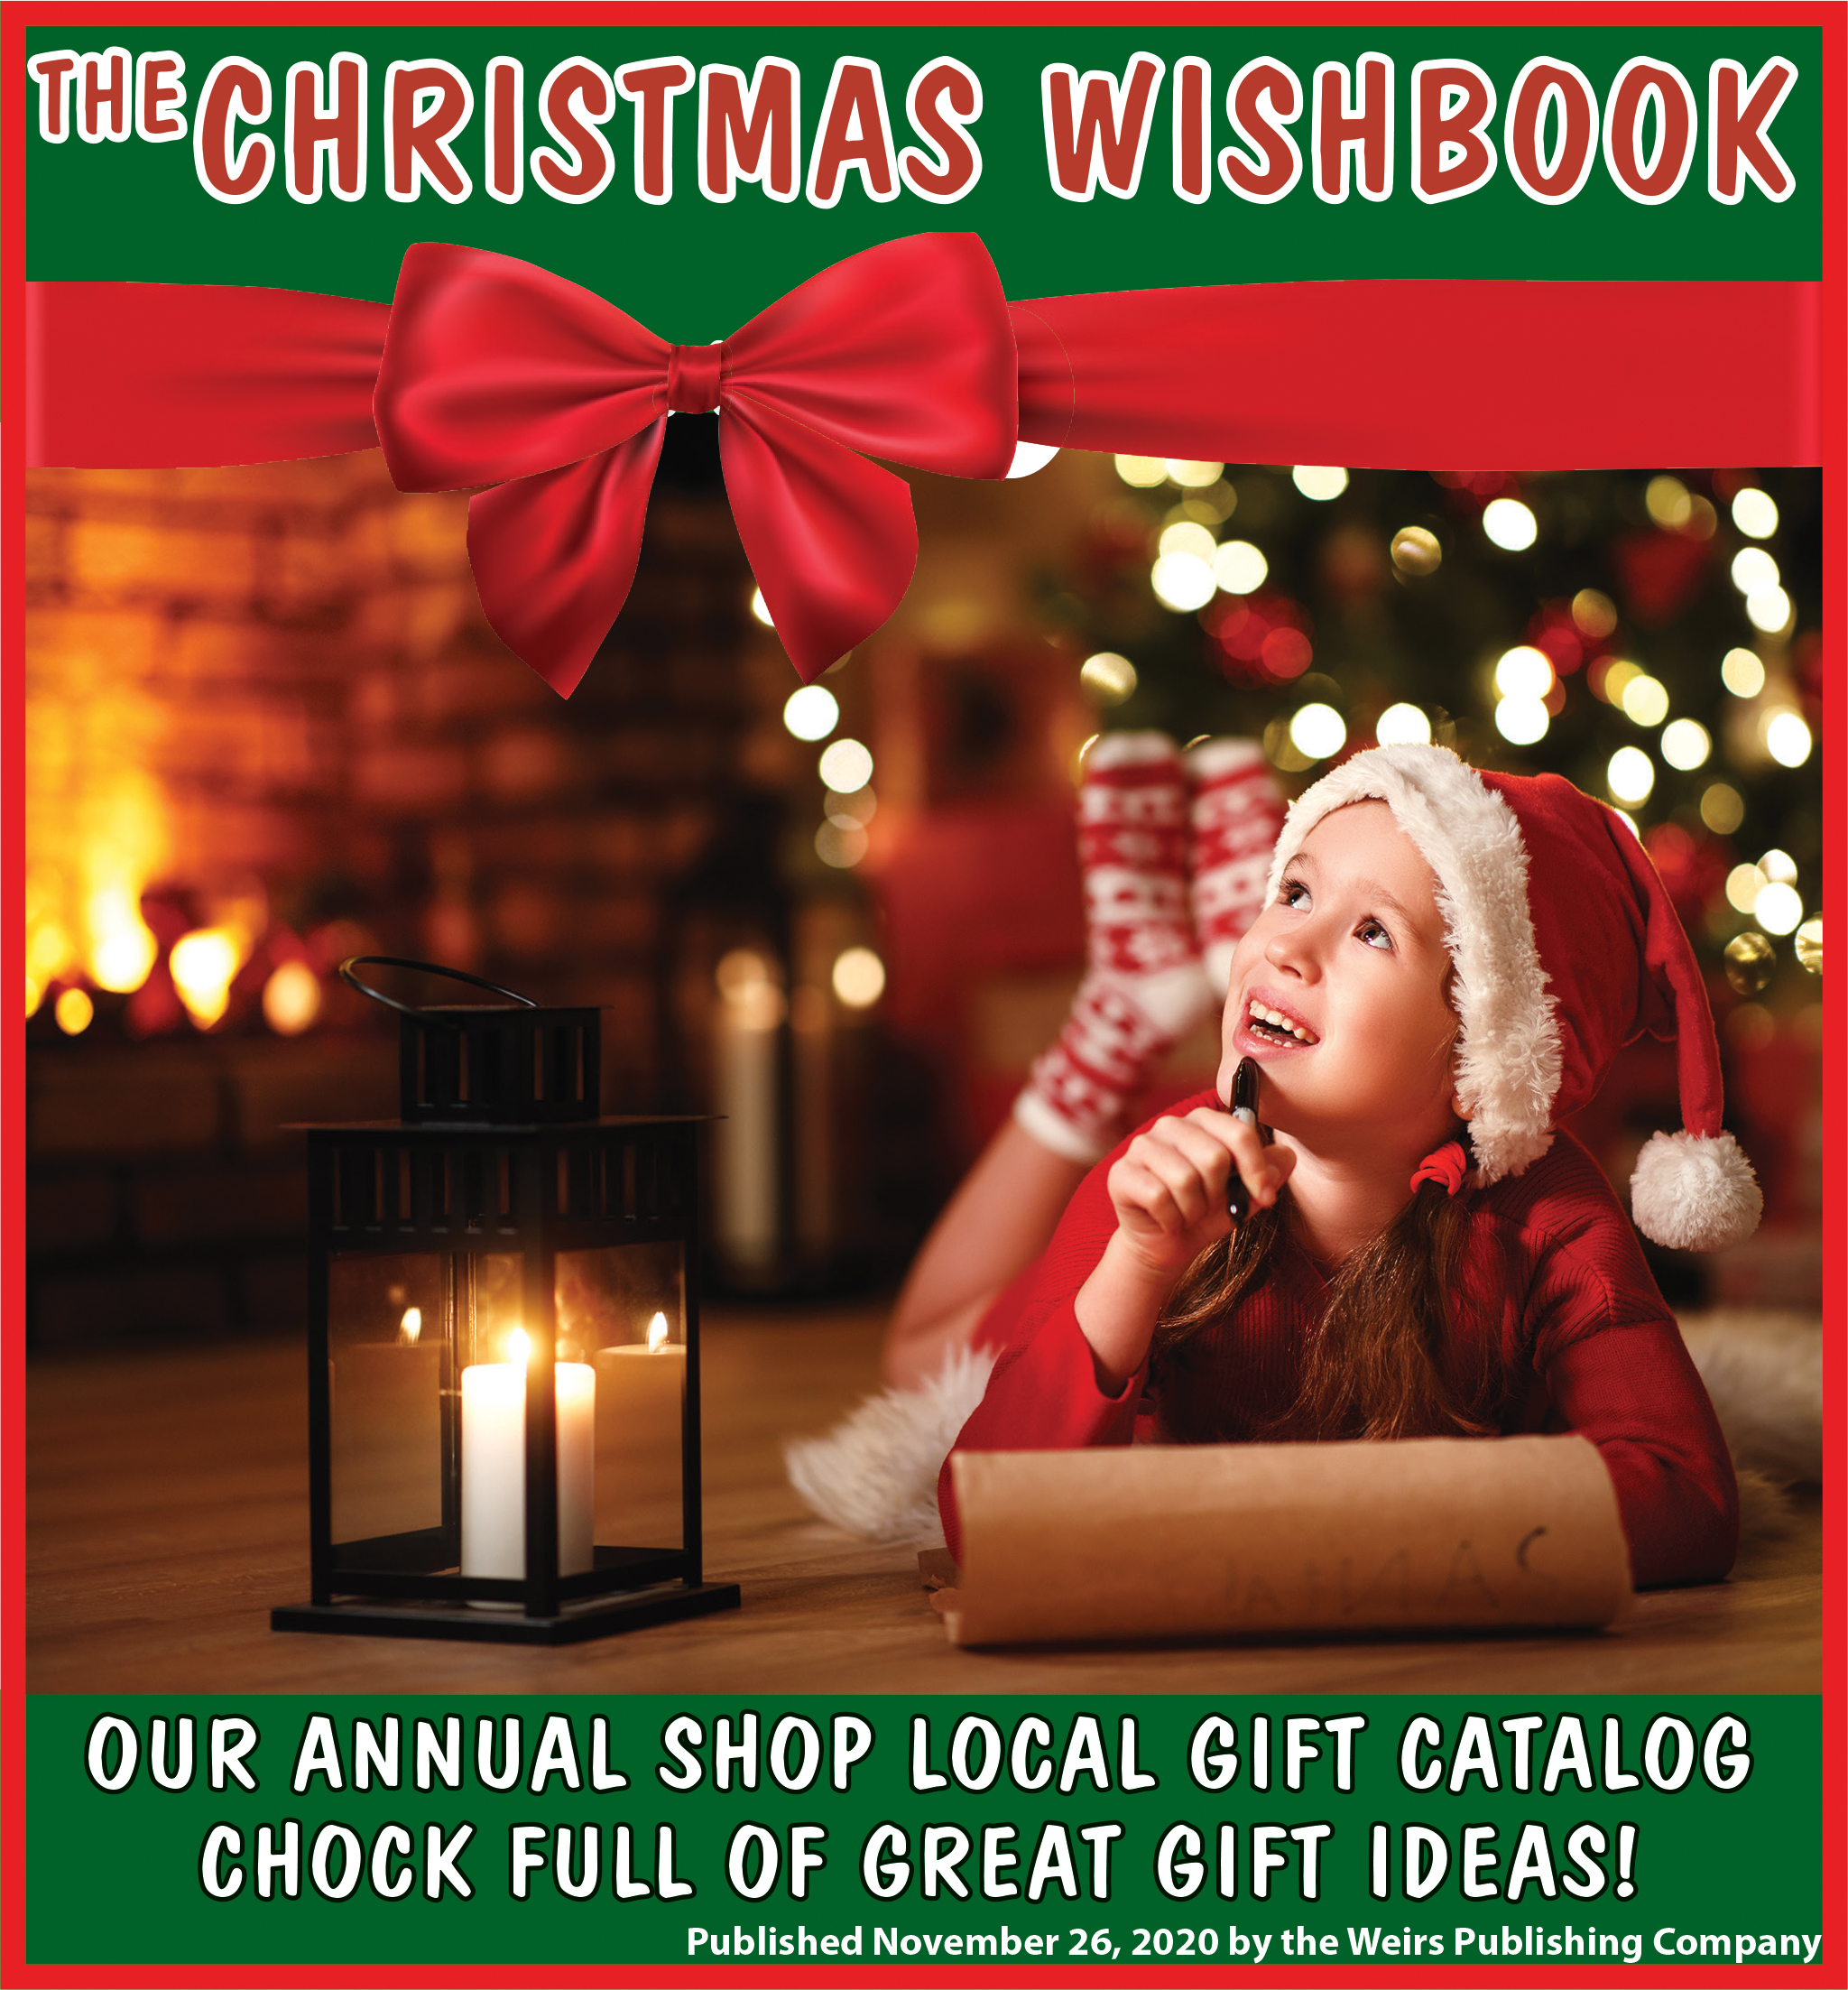 Our Annual Christmas Wishbook is Online Now!